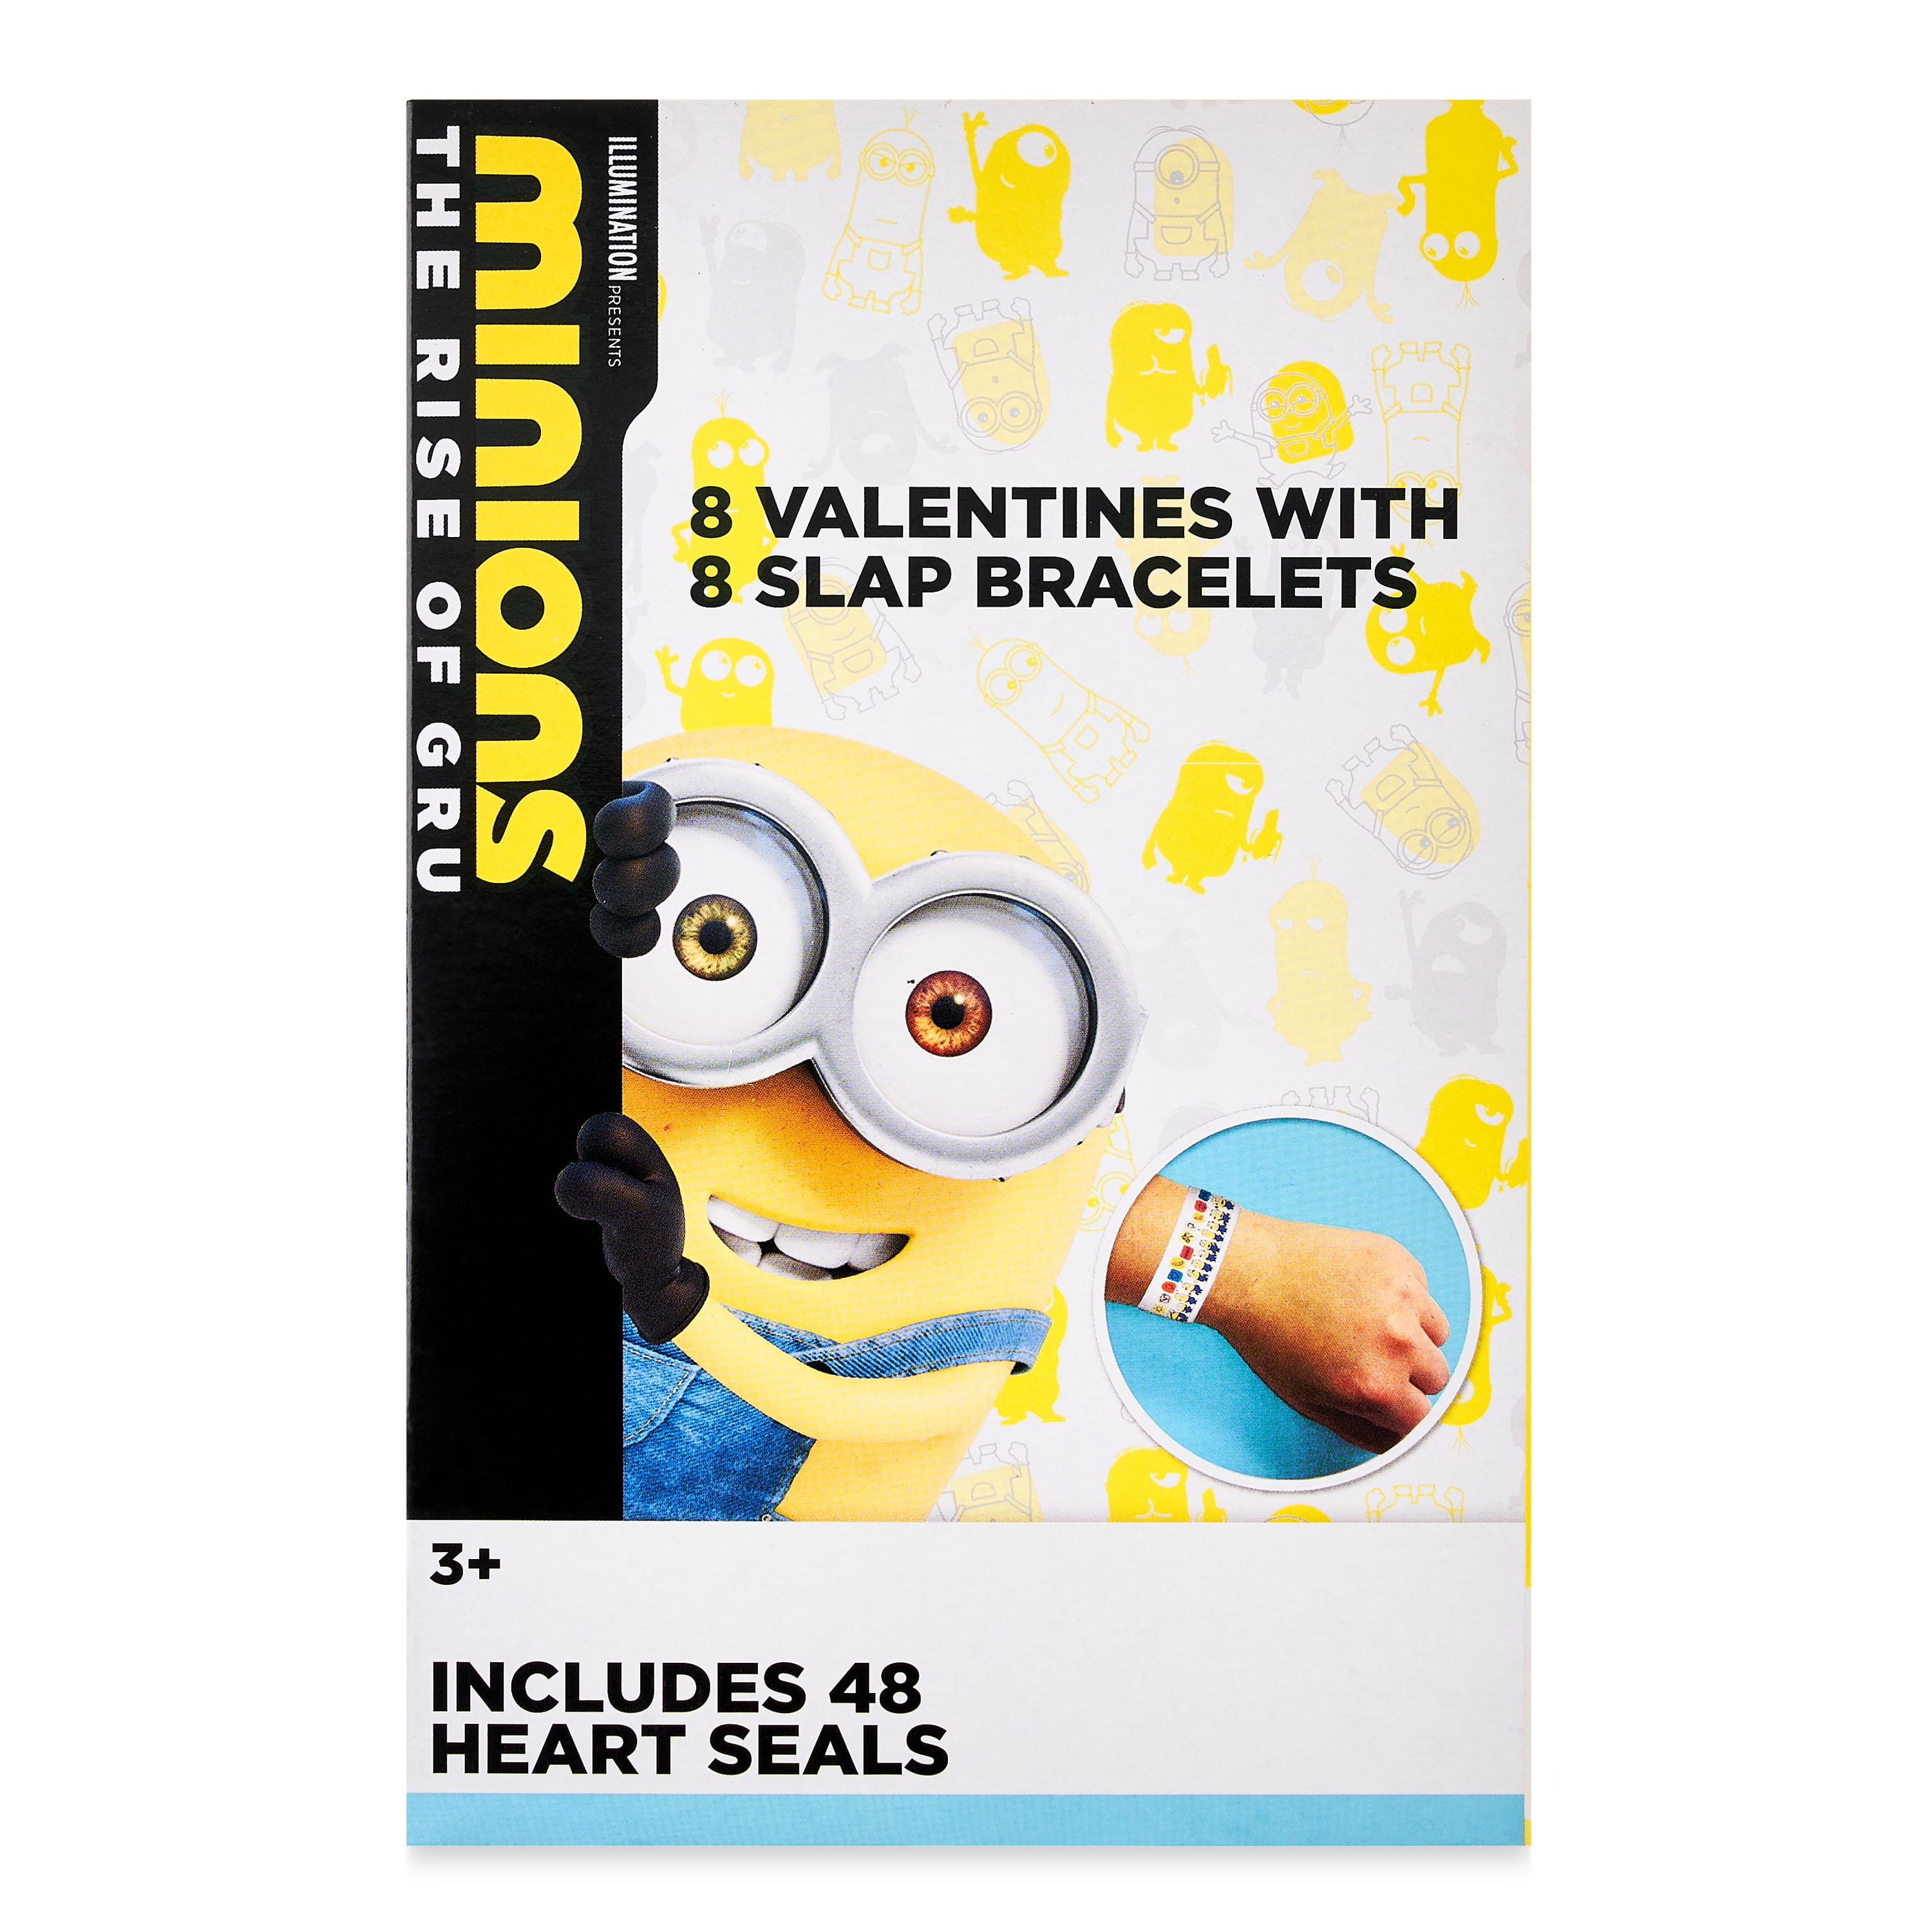 Despicable Me Way to Celebrate Dispicable Me Valentine's Day Cards, Kiddie Cards, Slap Bracelets, Multi-Color,Minions, 8 Count